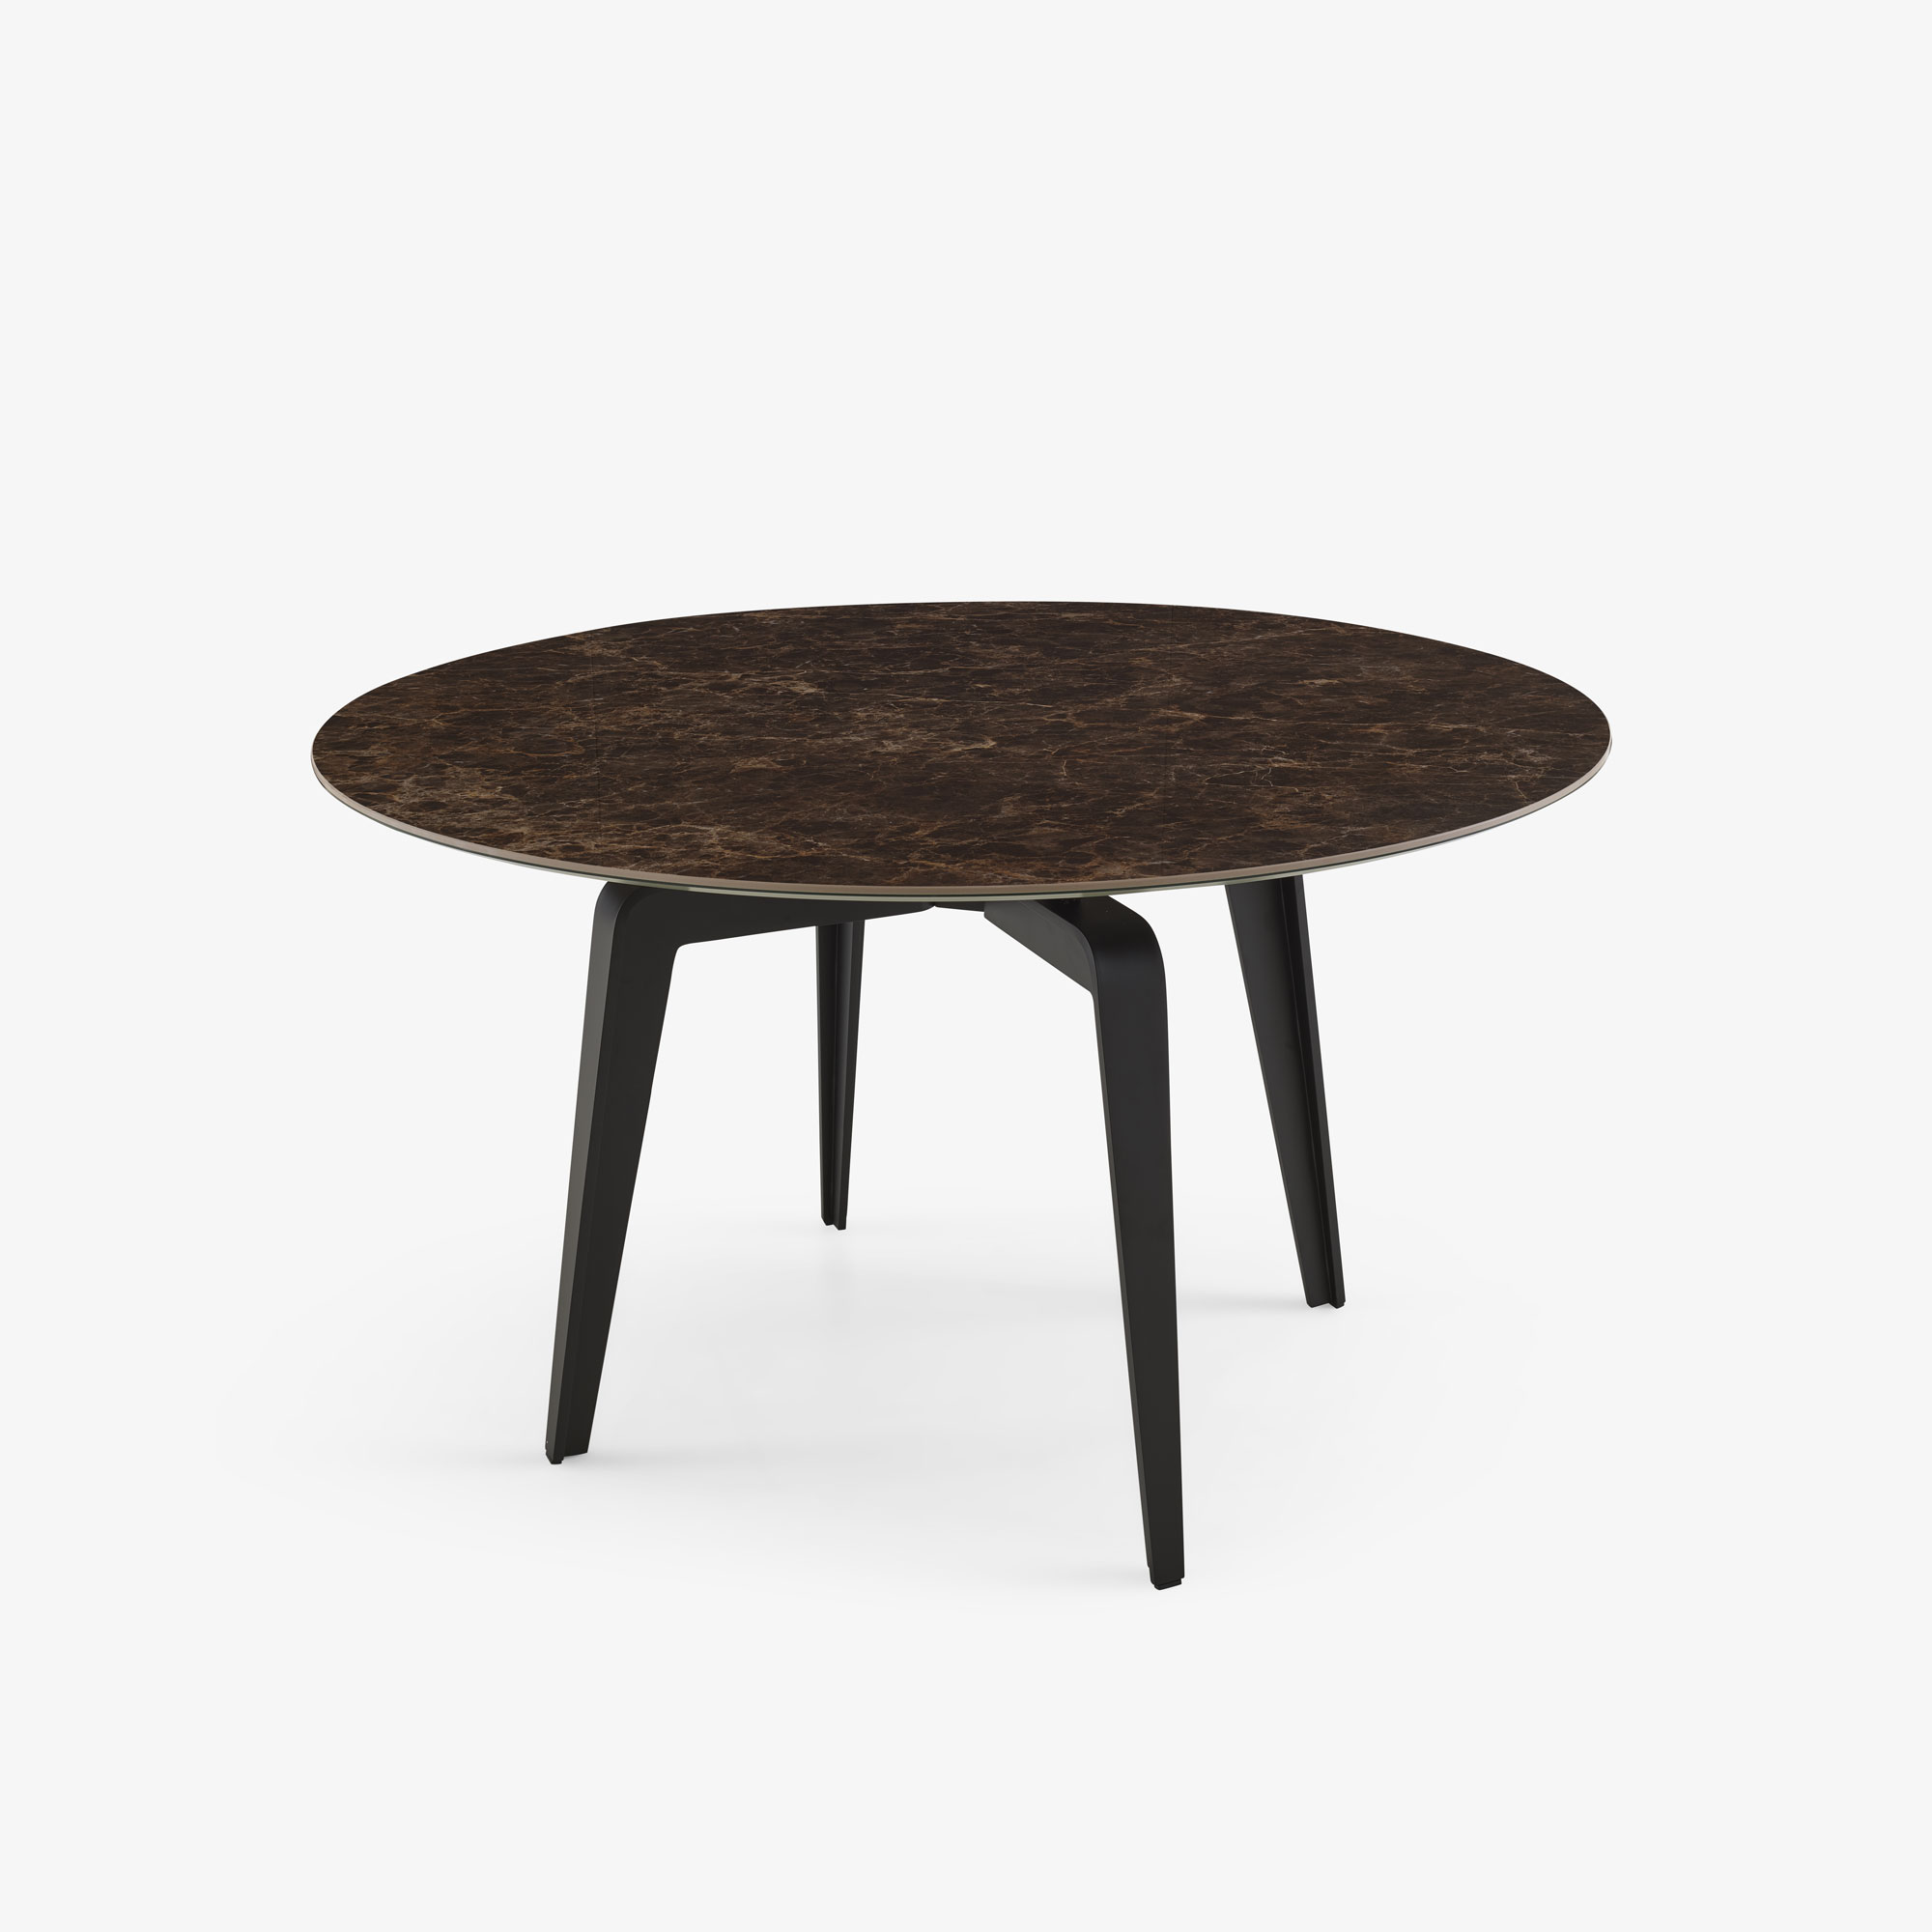 Image Round dining table black lacquered base  2